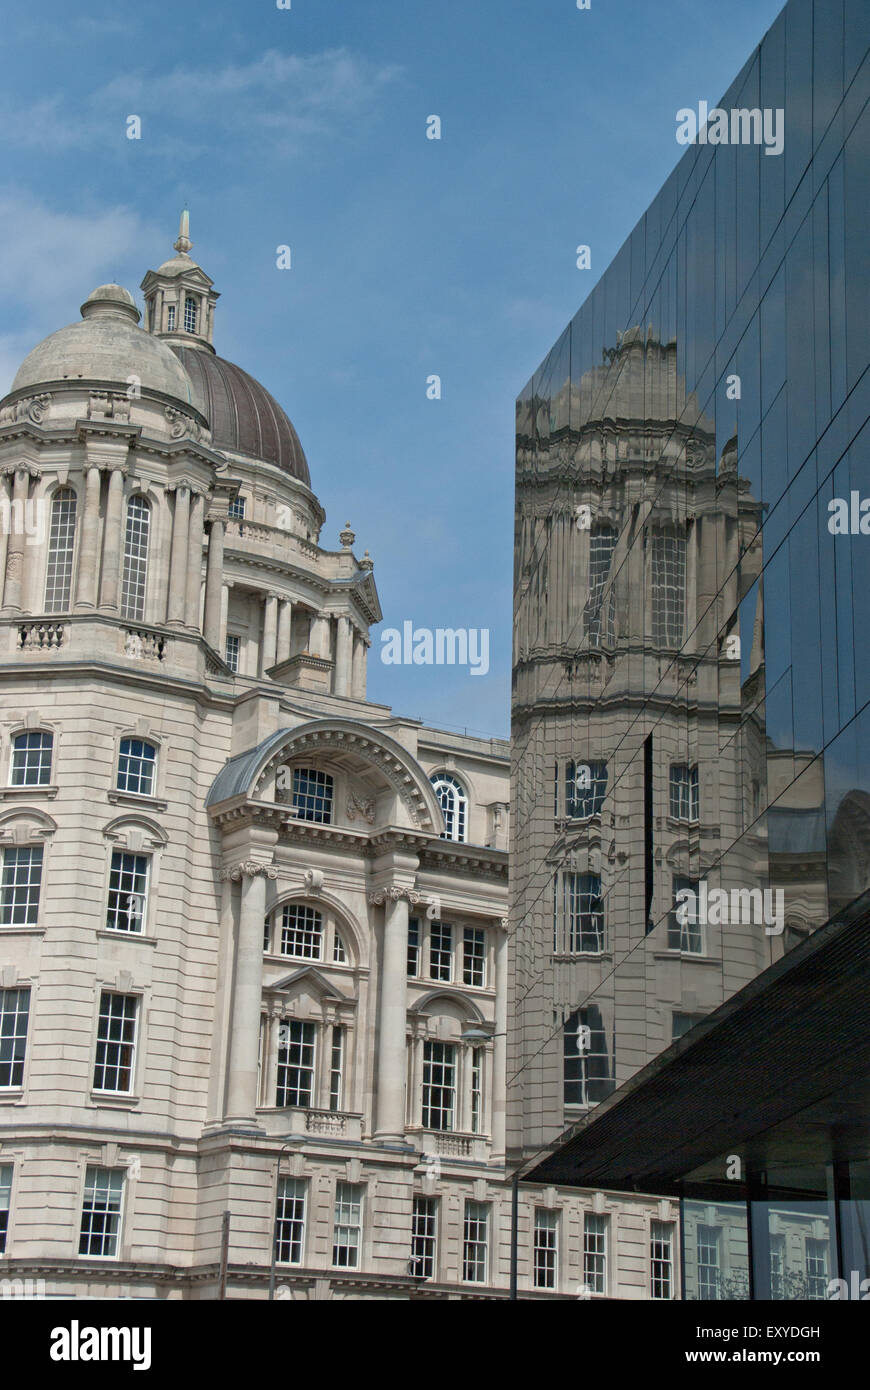 Reflection Port of Liverpool Building Stock Photo